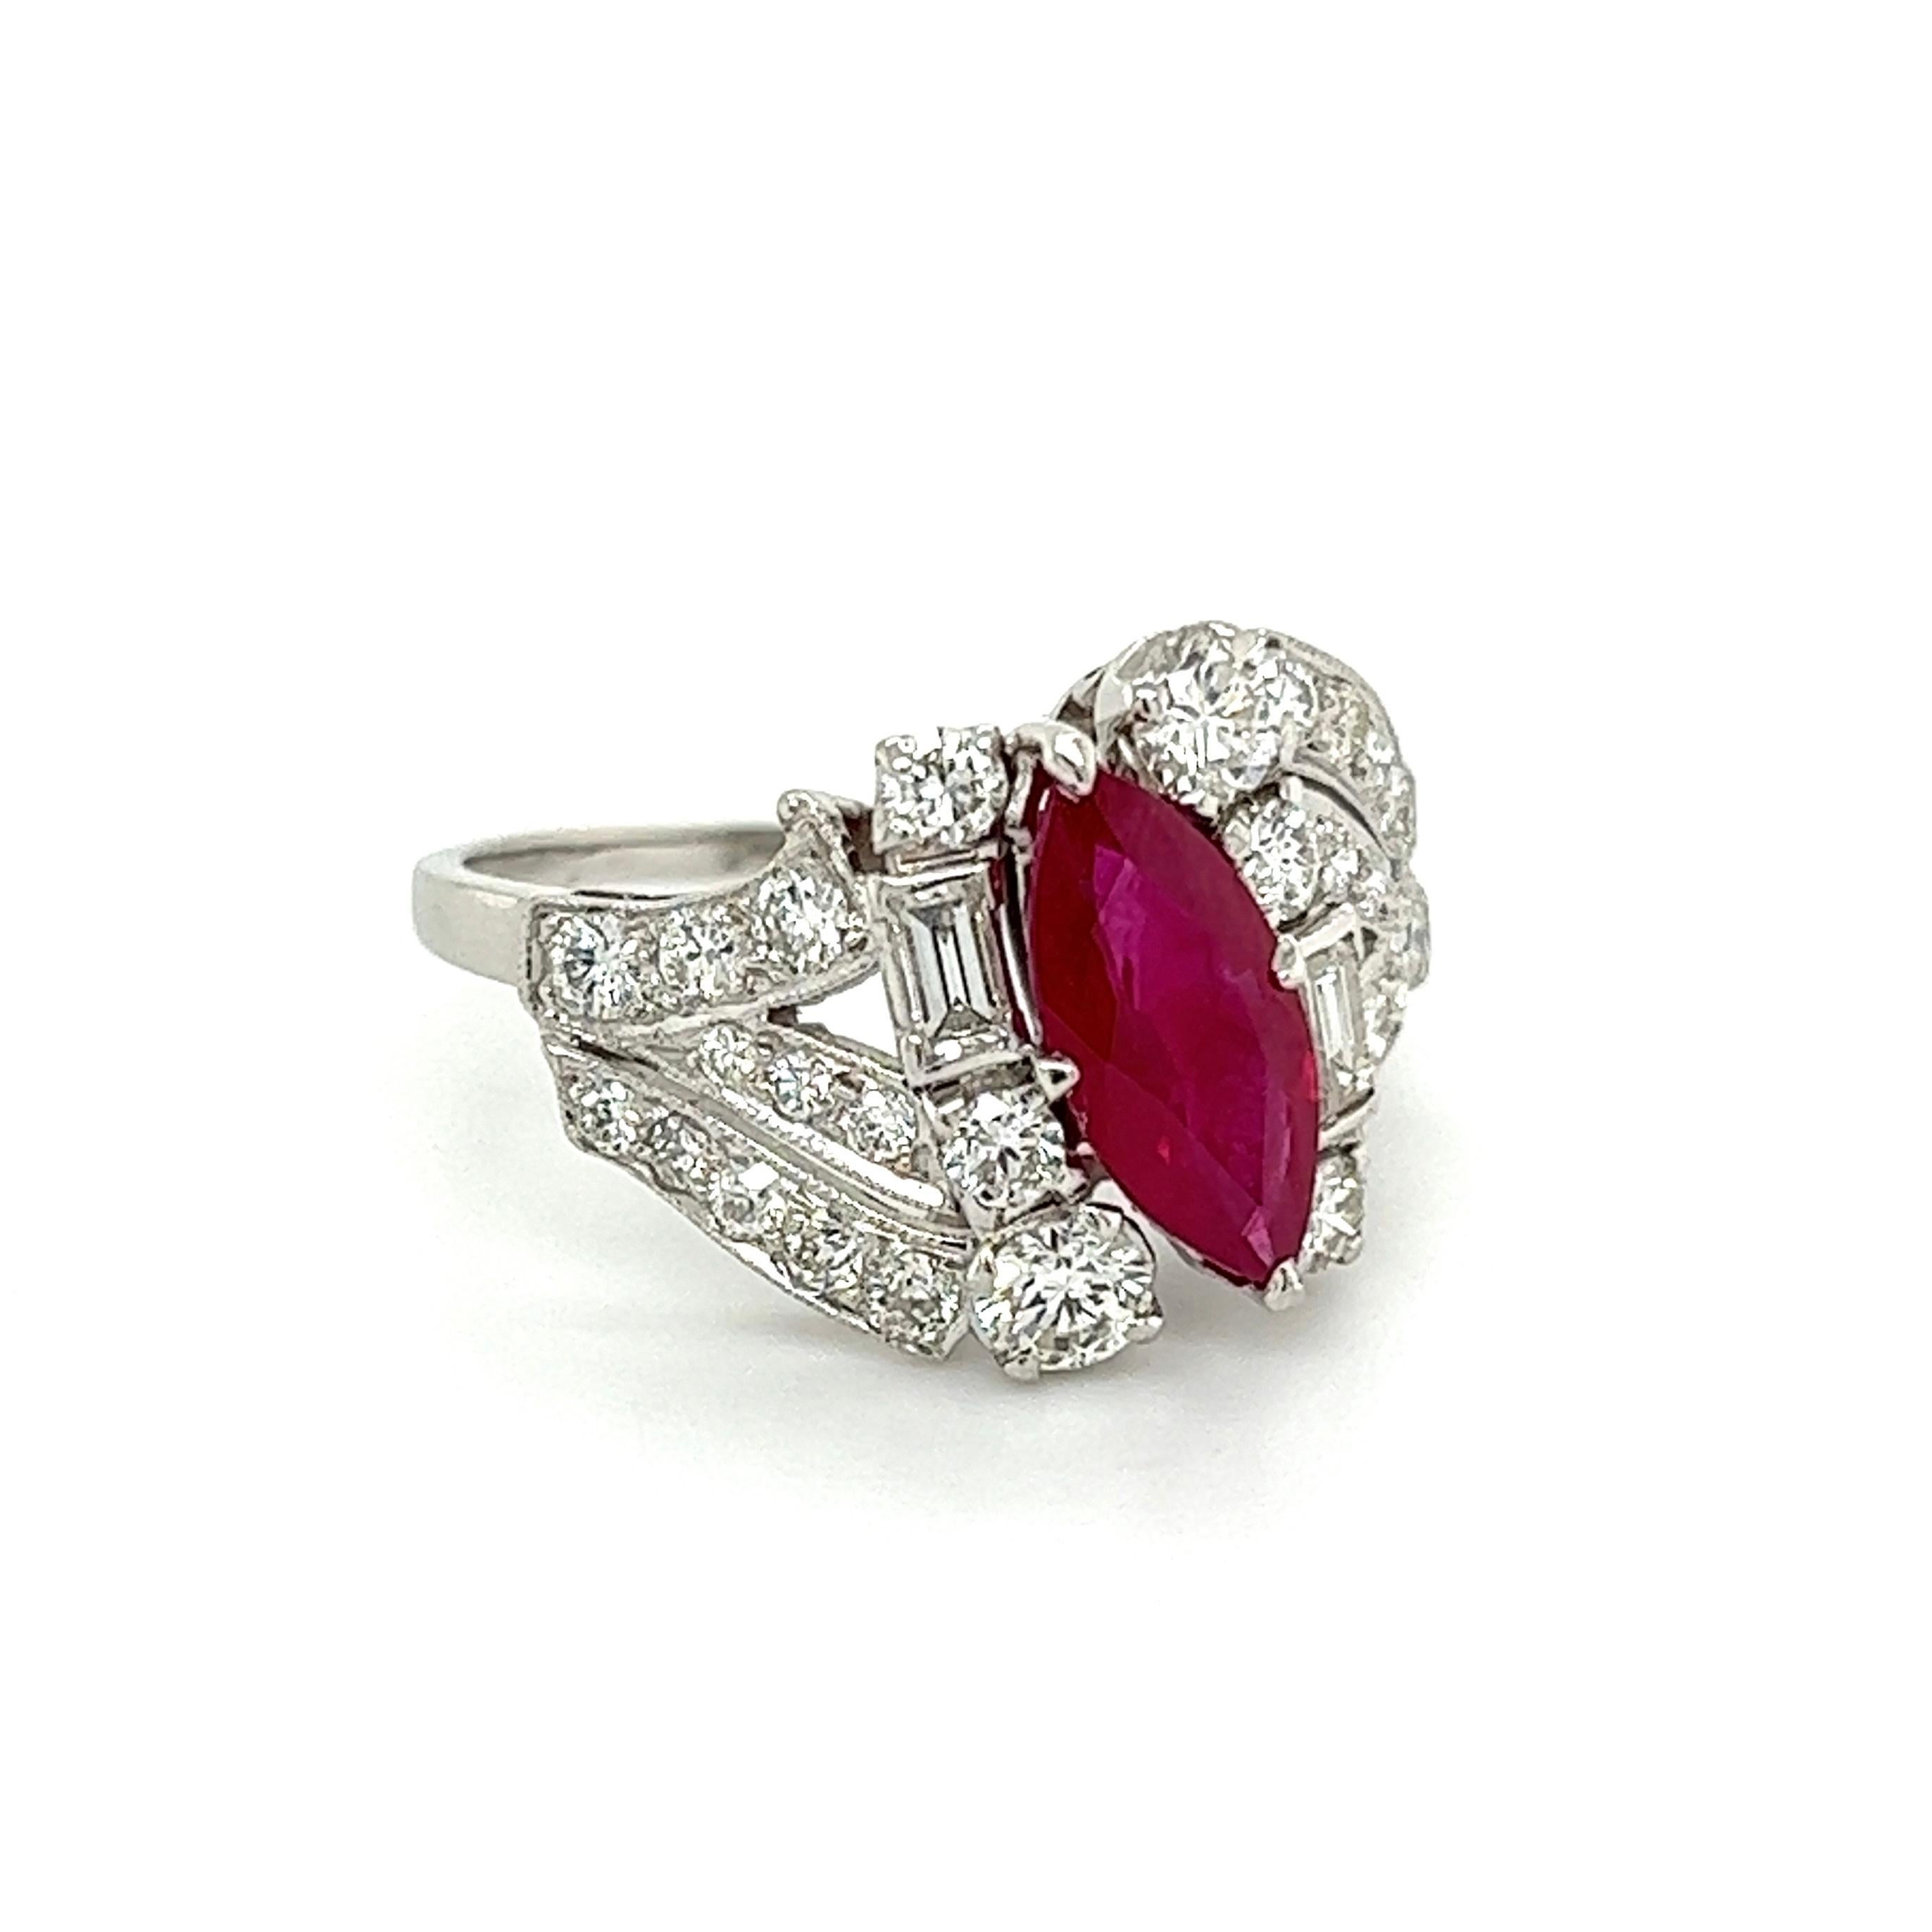 Simply Beautiful! Marquis Red Ruby and Diamond Platinum Ring. Centering a securely nestled Hand set 1.30 Carat Marquis Ruby, artistically surrounded by Diamonds, approx. 1.70tcw. Hand-crafted Platinum mounting. Ring size 6.75, we offer ring